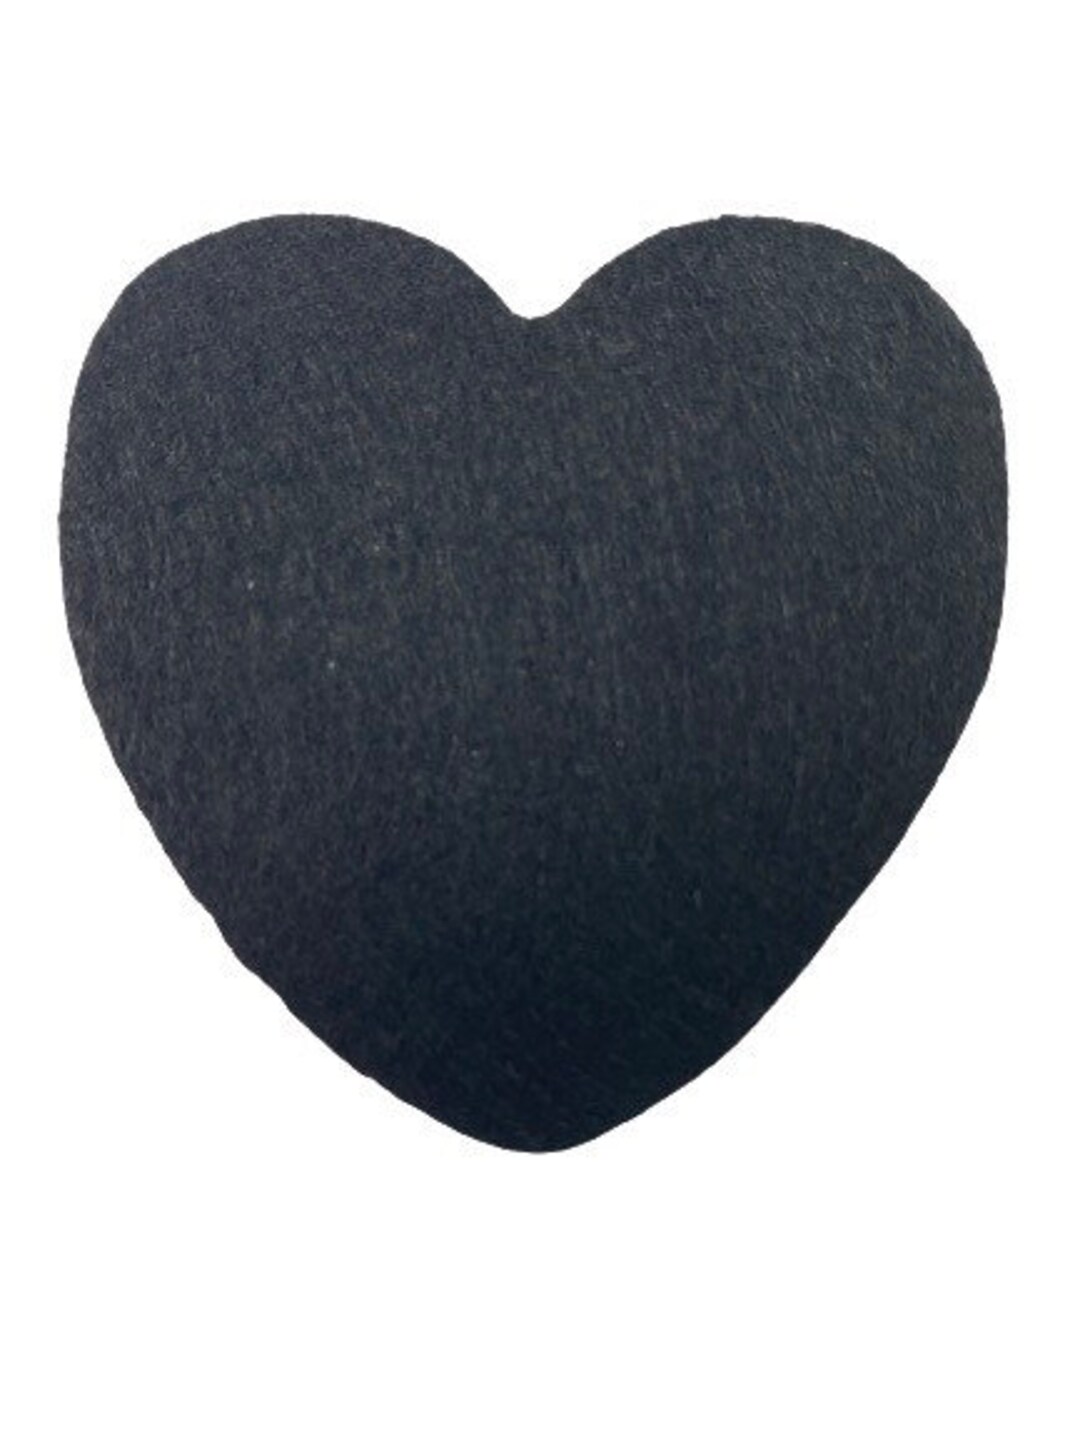 HEART-8 Cavity Heart Shaped Silicone Mold for Gypsum/cement Heart Shaped  Rocks for Rock Painting Dot Mandalas 